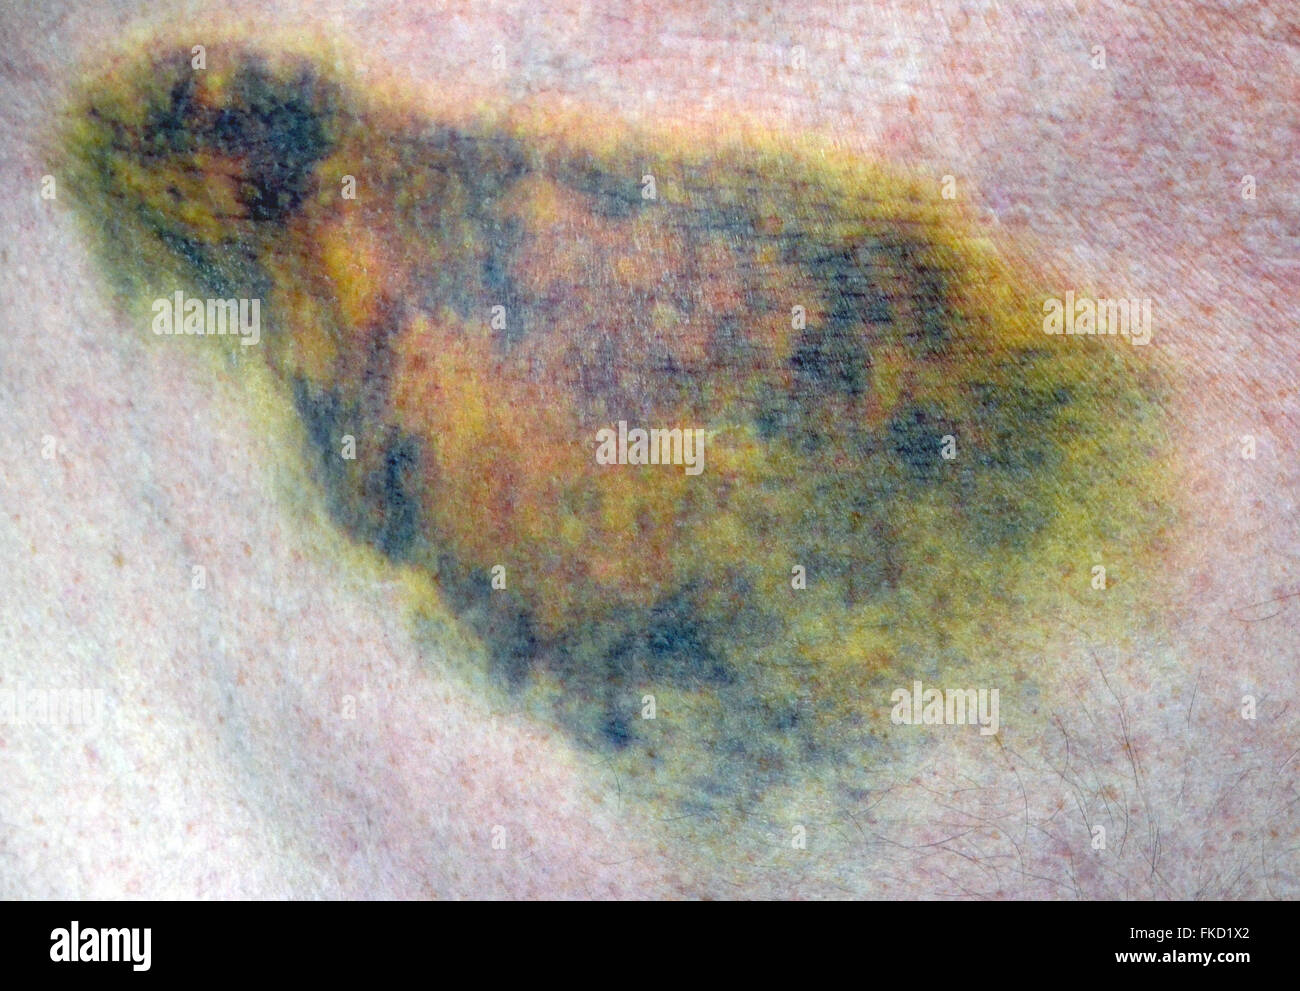 This close-up shows the multicolored effects of a body bruise on the stomach of a Caucasian man who fell and broke small blood vessels that leaked into the tissues under the skin. Bruises often turn various colors as they heal but usually fade away within two to four weeks without any long-lasting harm to the person. Stock Photo